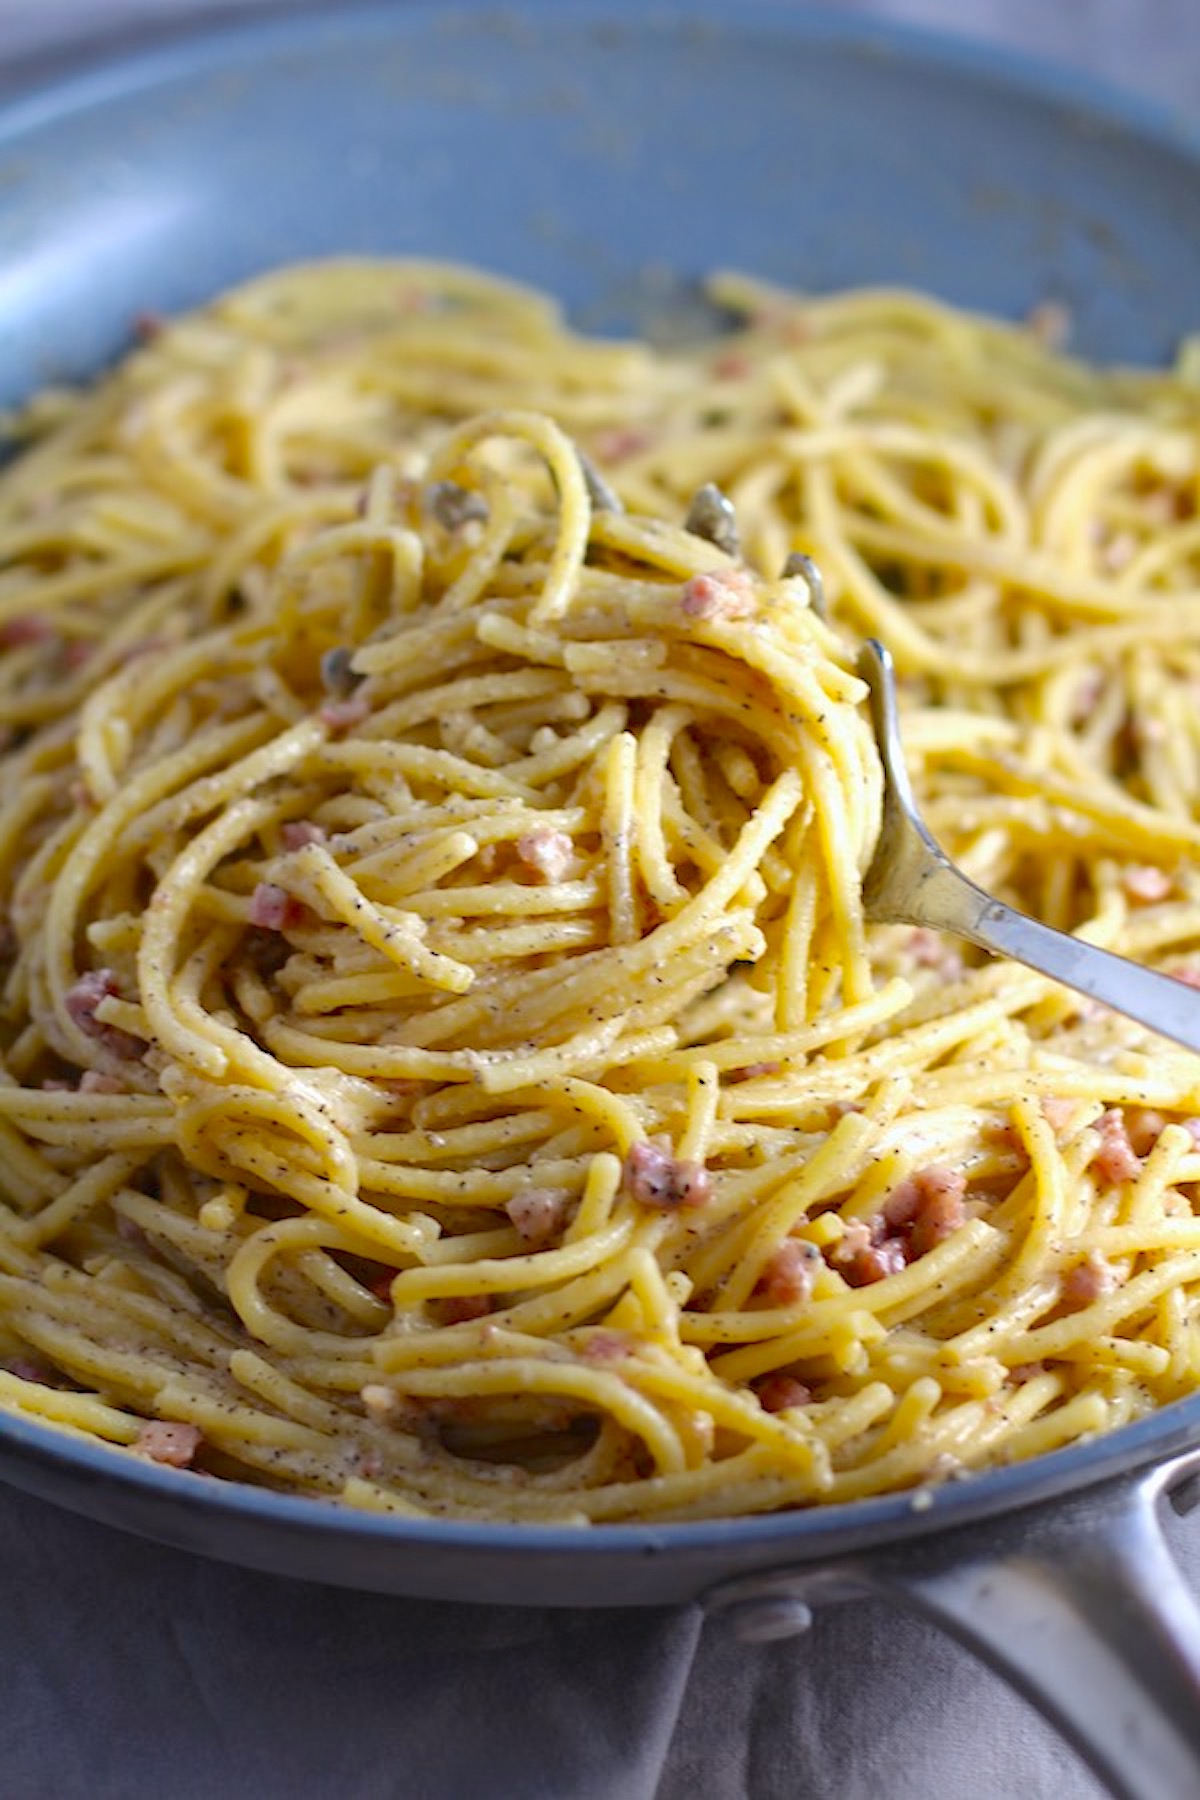 Pasta with Pancetta Parmesan and Black Pepper in skillet with a spoon. The Pancetta gives a salty and slightly peppery flavor, Parmesan cheese creates a nutty and creamy sauce, and the ground black pepper gives a peppery flavor that makes this pasta stand out. #pasta #easypasta #easydinner #dinner #italian #familydinner #onpotdinners #onepandinners #parmesan